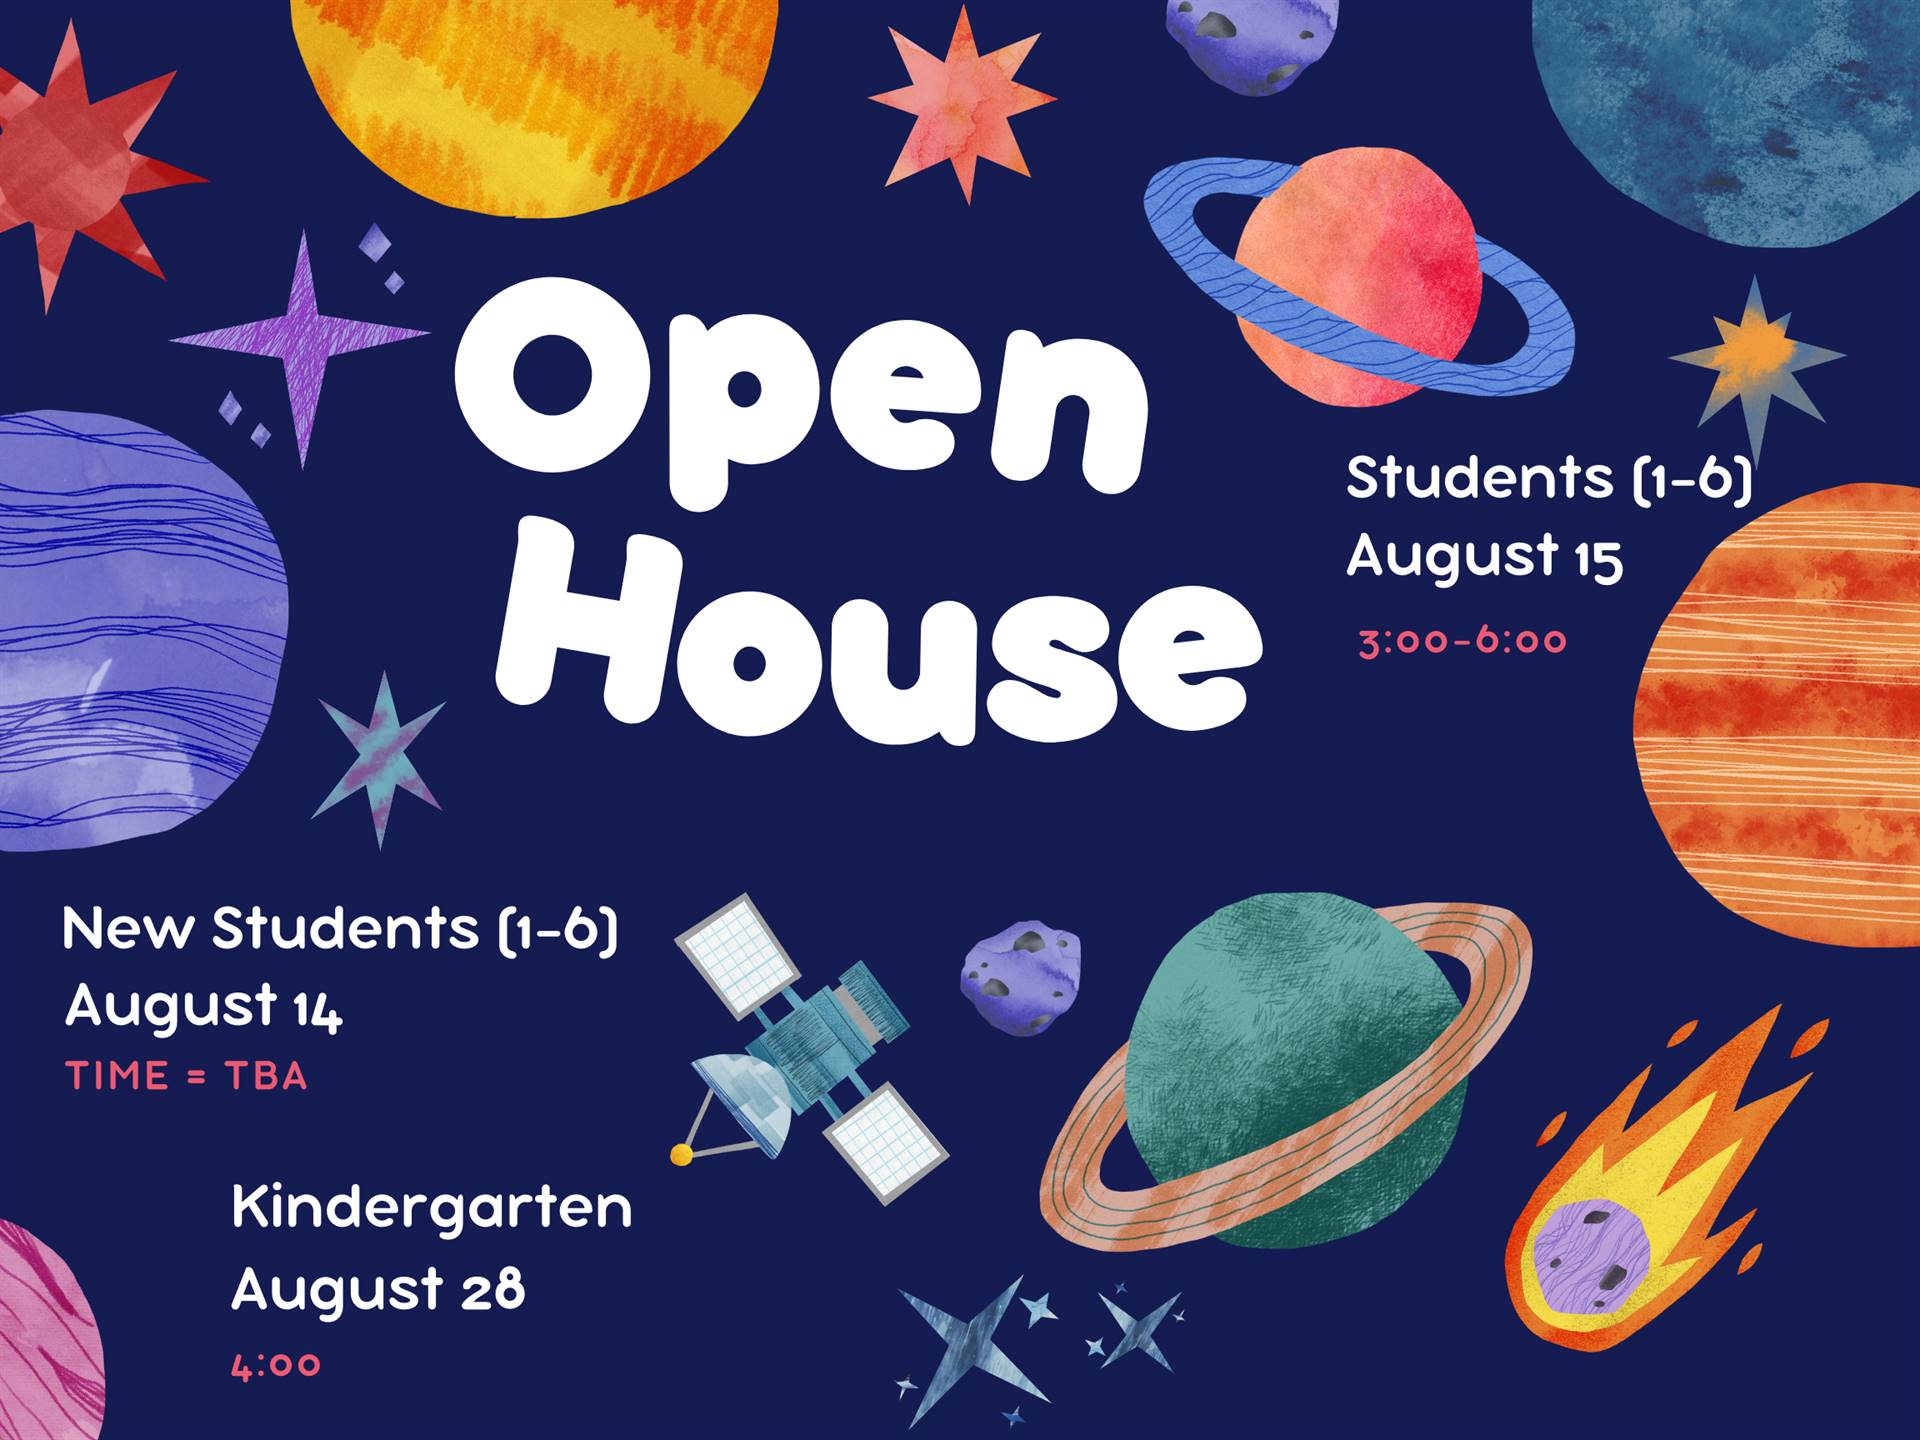 Open House Students 1-6 August 14-15 3:00-6:00 and Kindergarten August 28 